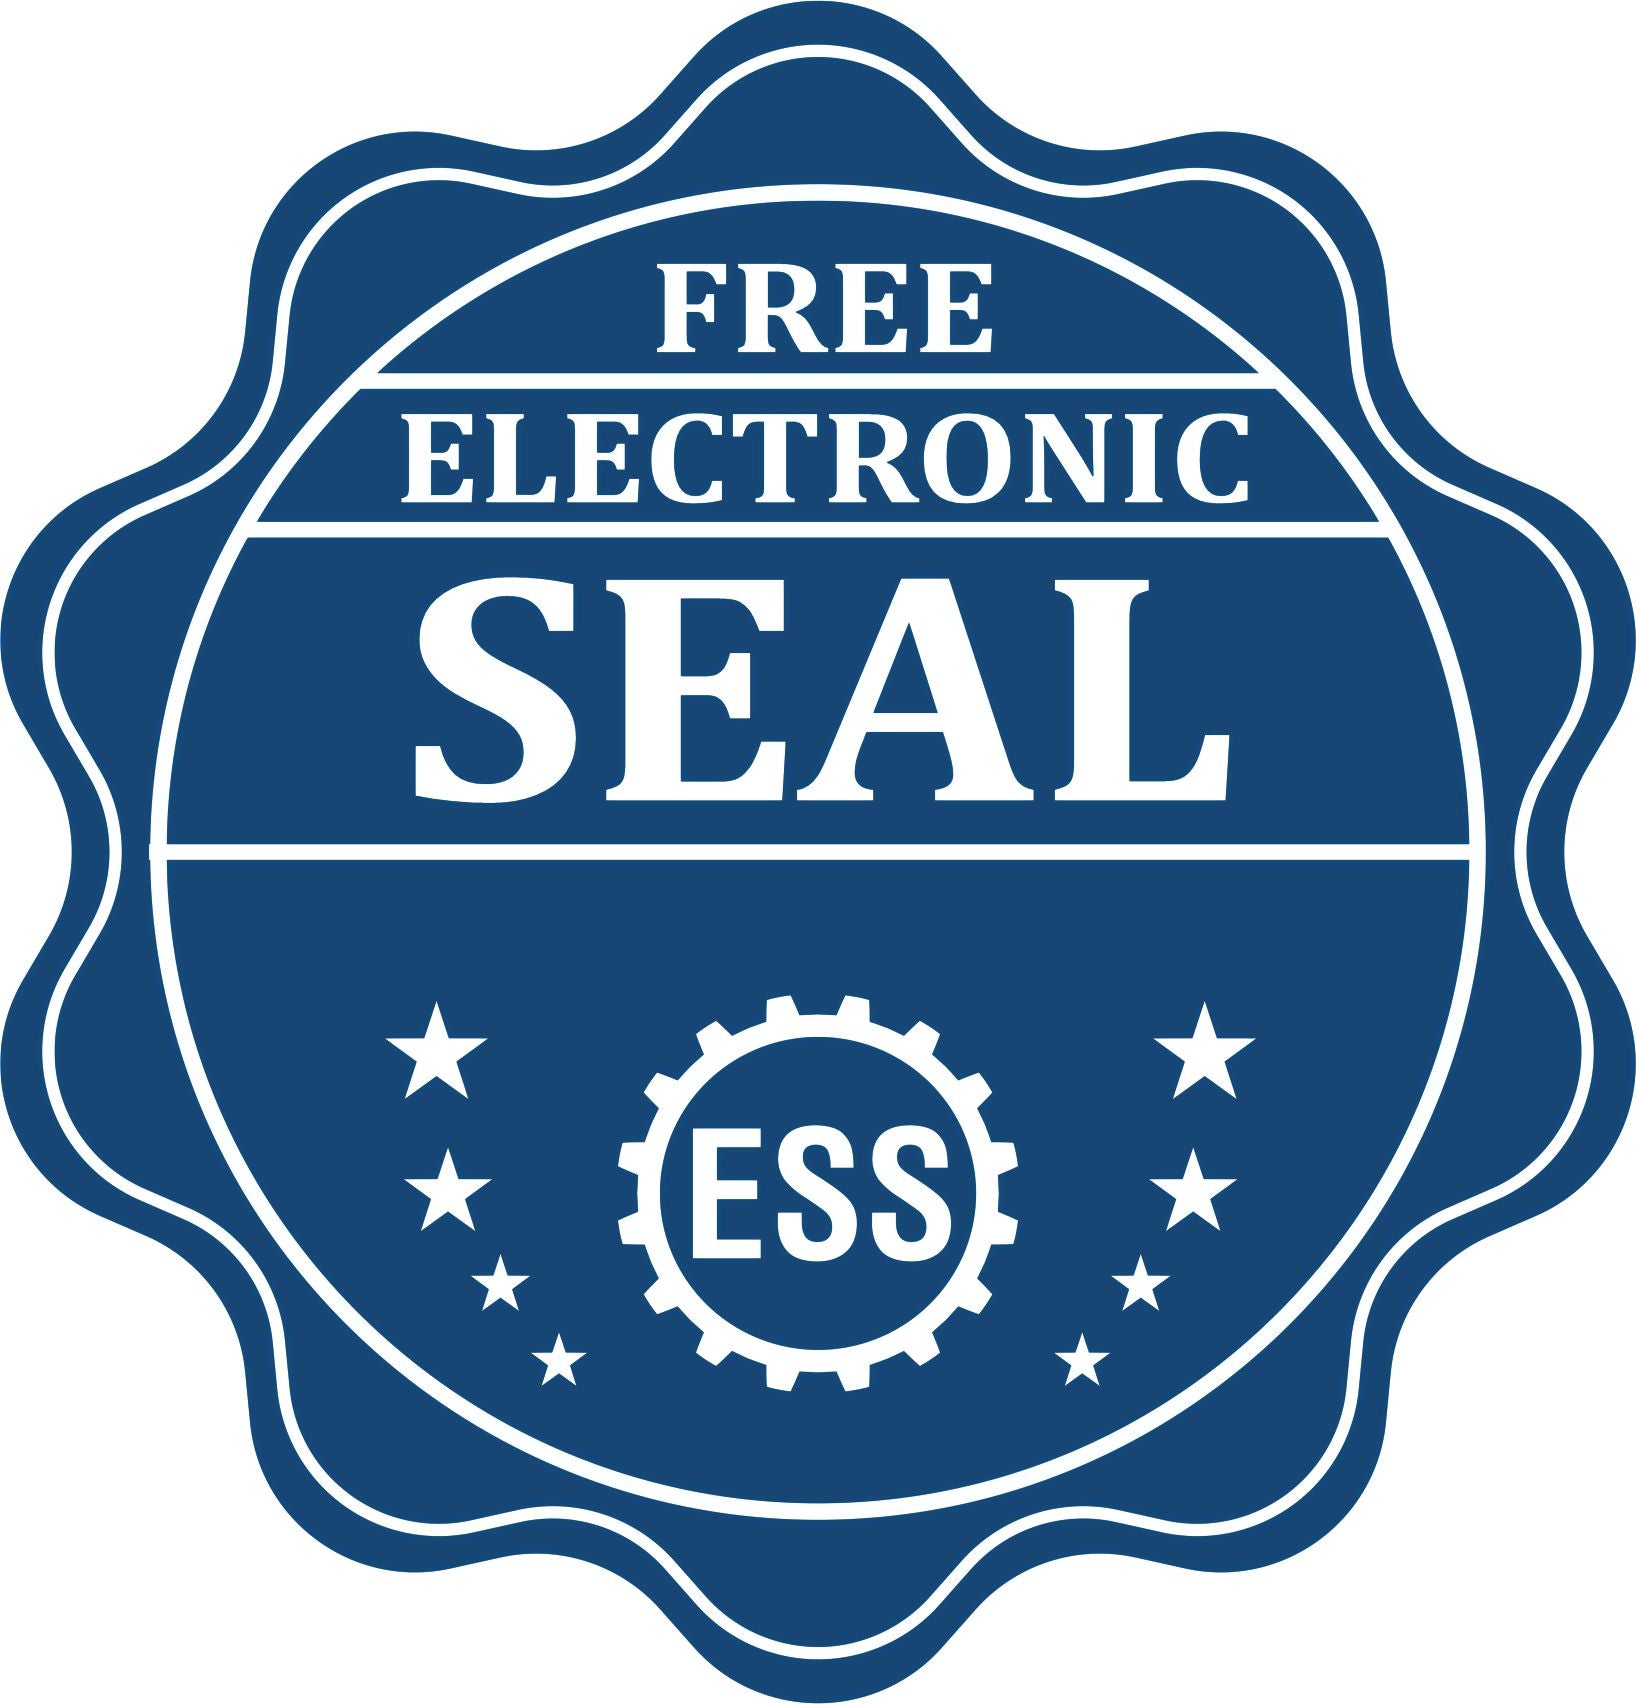 A badge showing a free electronic seal for the Wooden Handle South Dakota Rectangular Notary Public Stamp with stars and the ESS gear on the emblem.